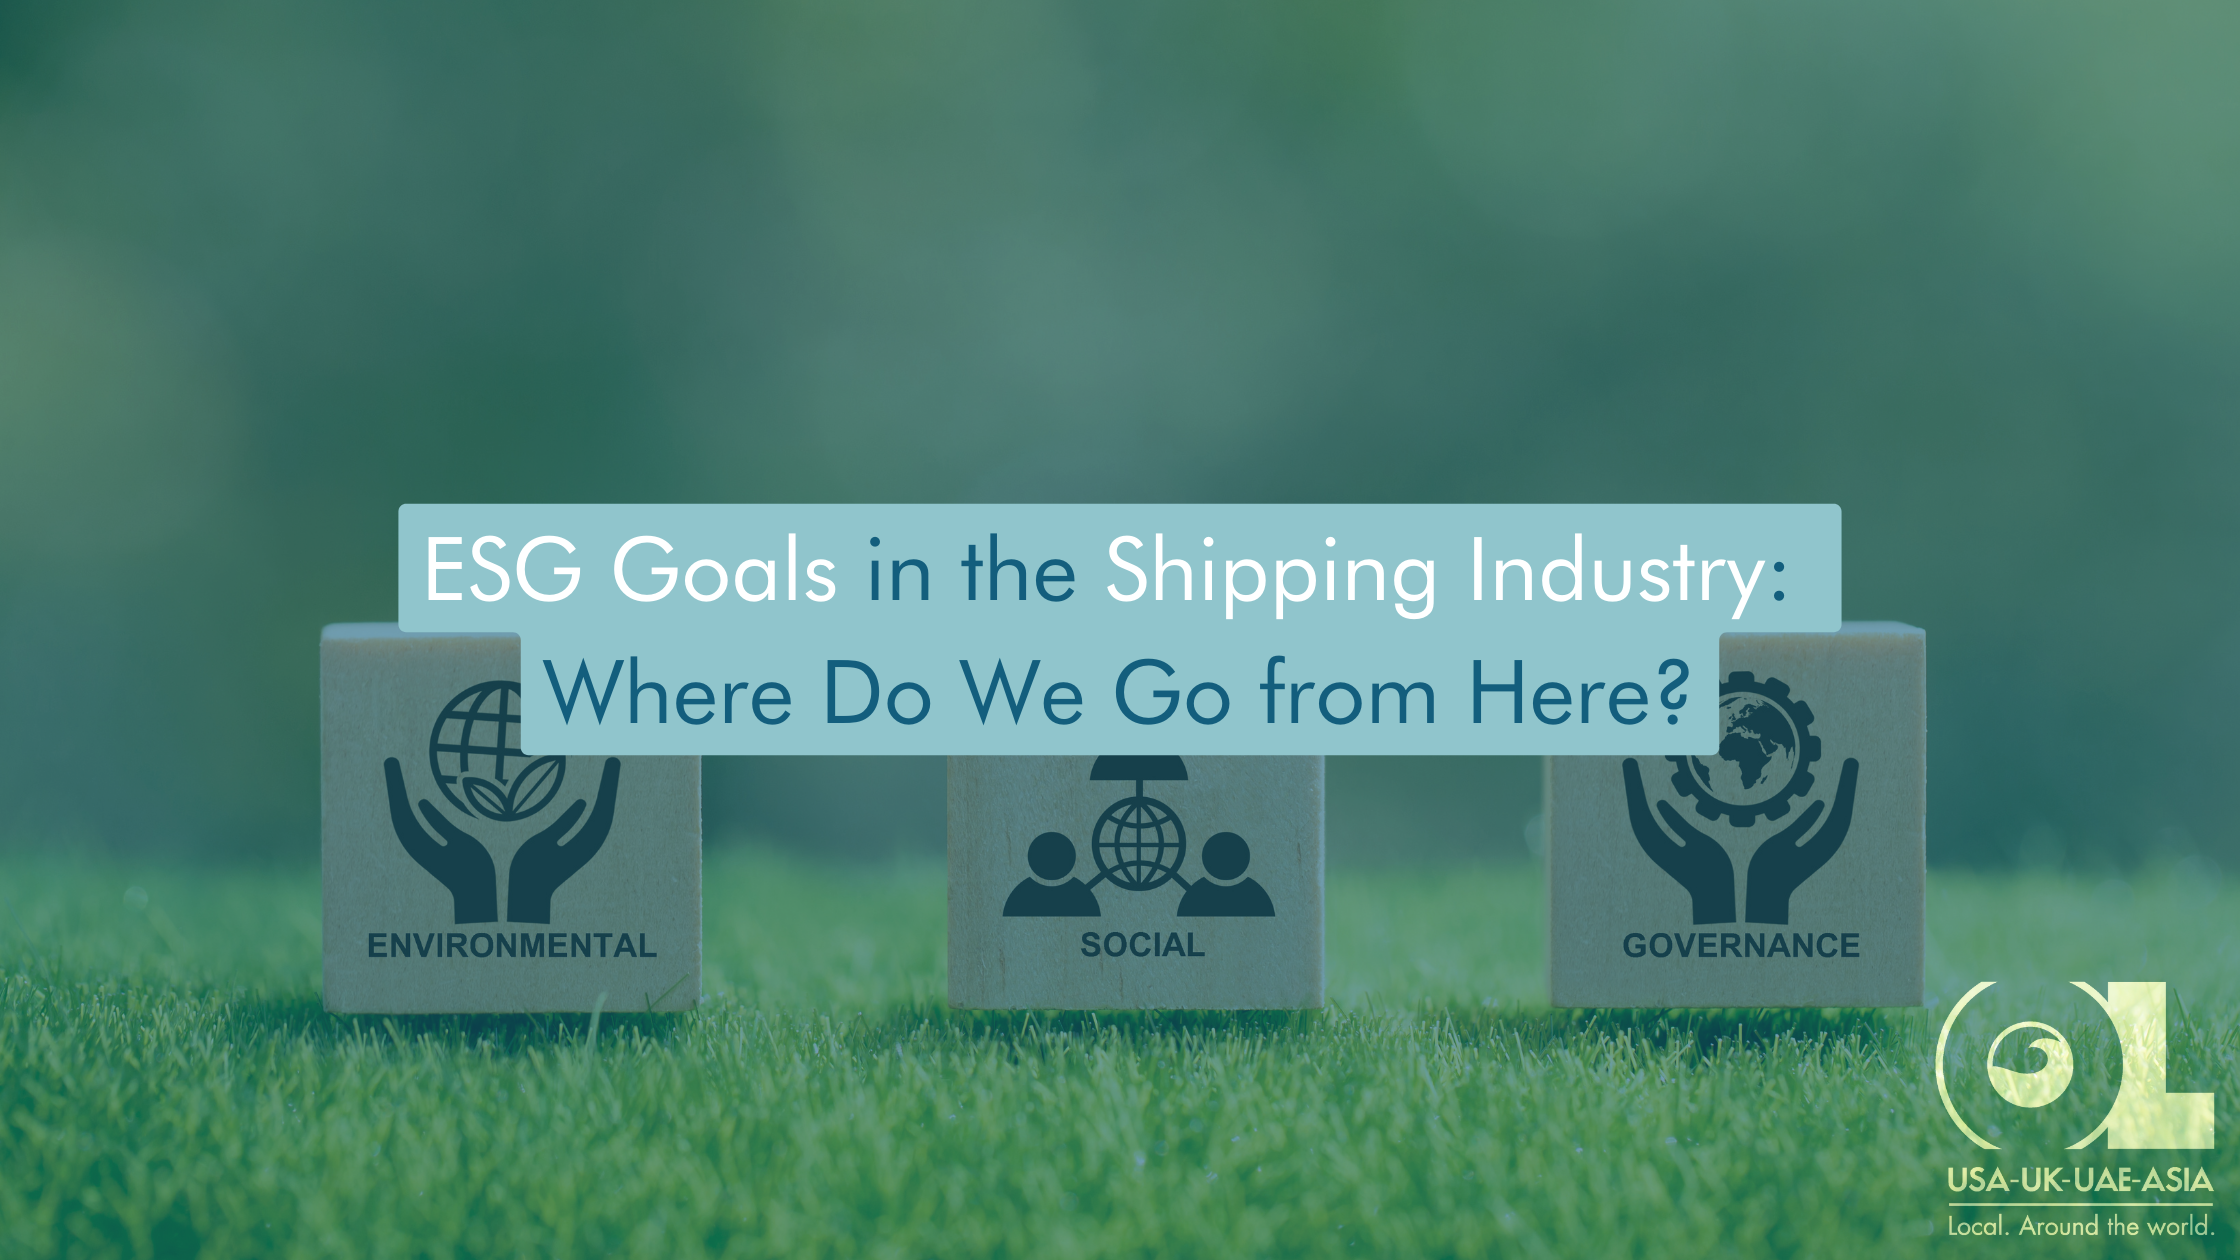 ESG-Goals-in-the-Shipping-Industry-Where-Do-We-Go-From-Here-OL-USA